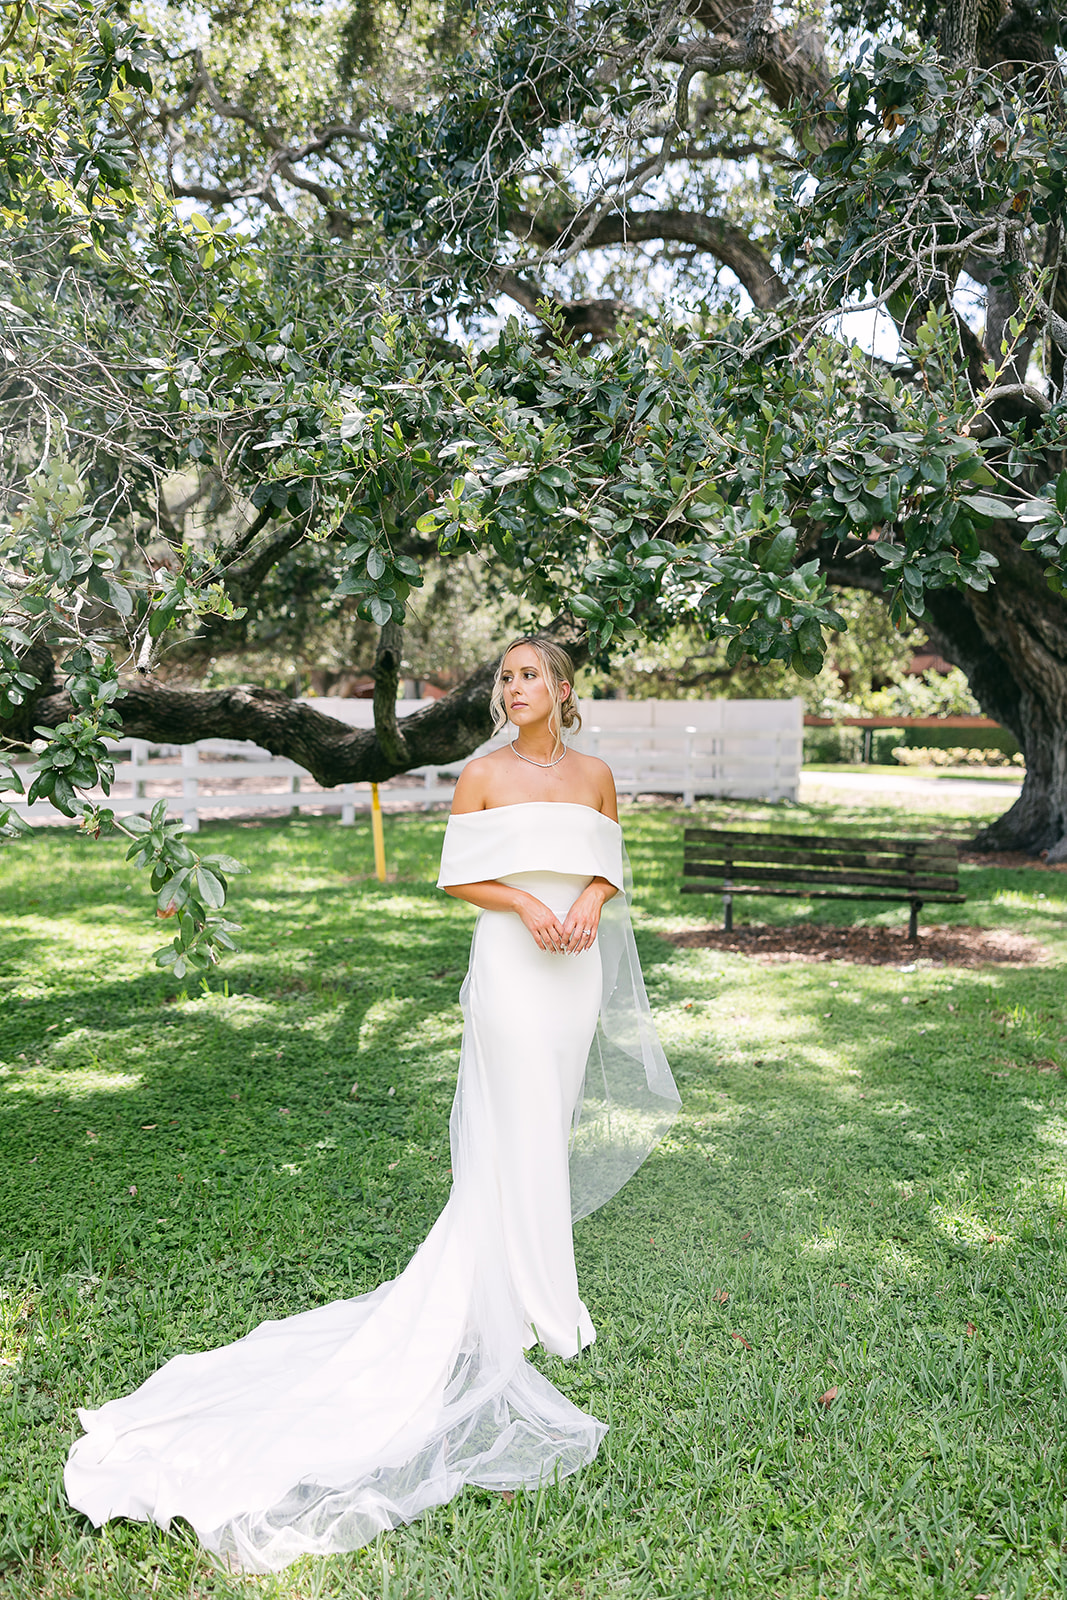 how to pose bride for wedding portrait. high end elopement wedding in tampa florida. sarah bradshaw photography.